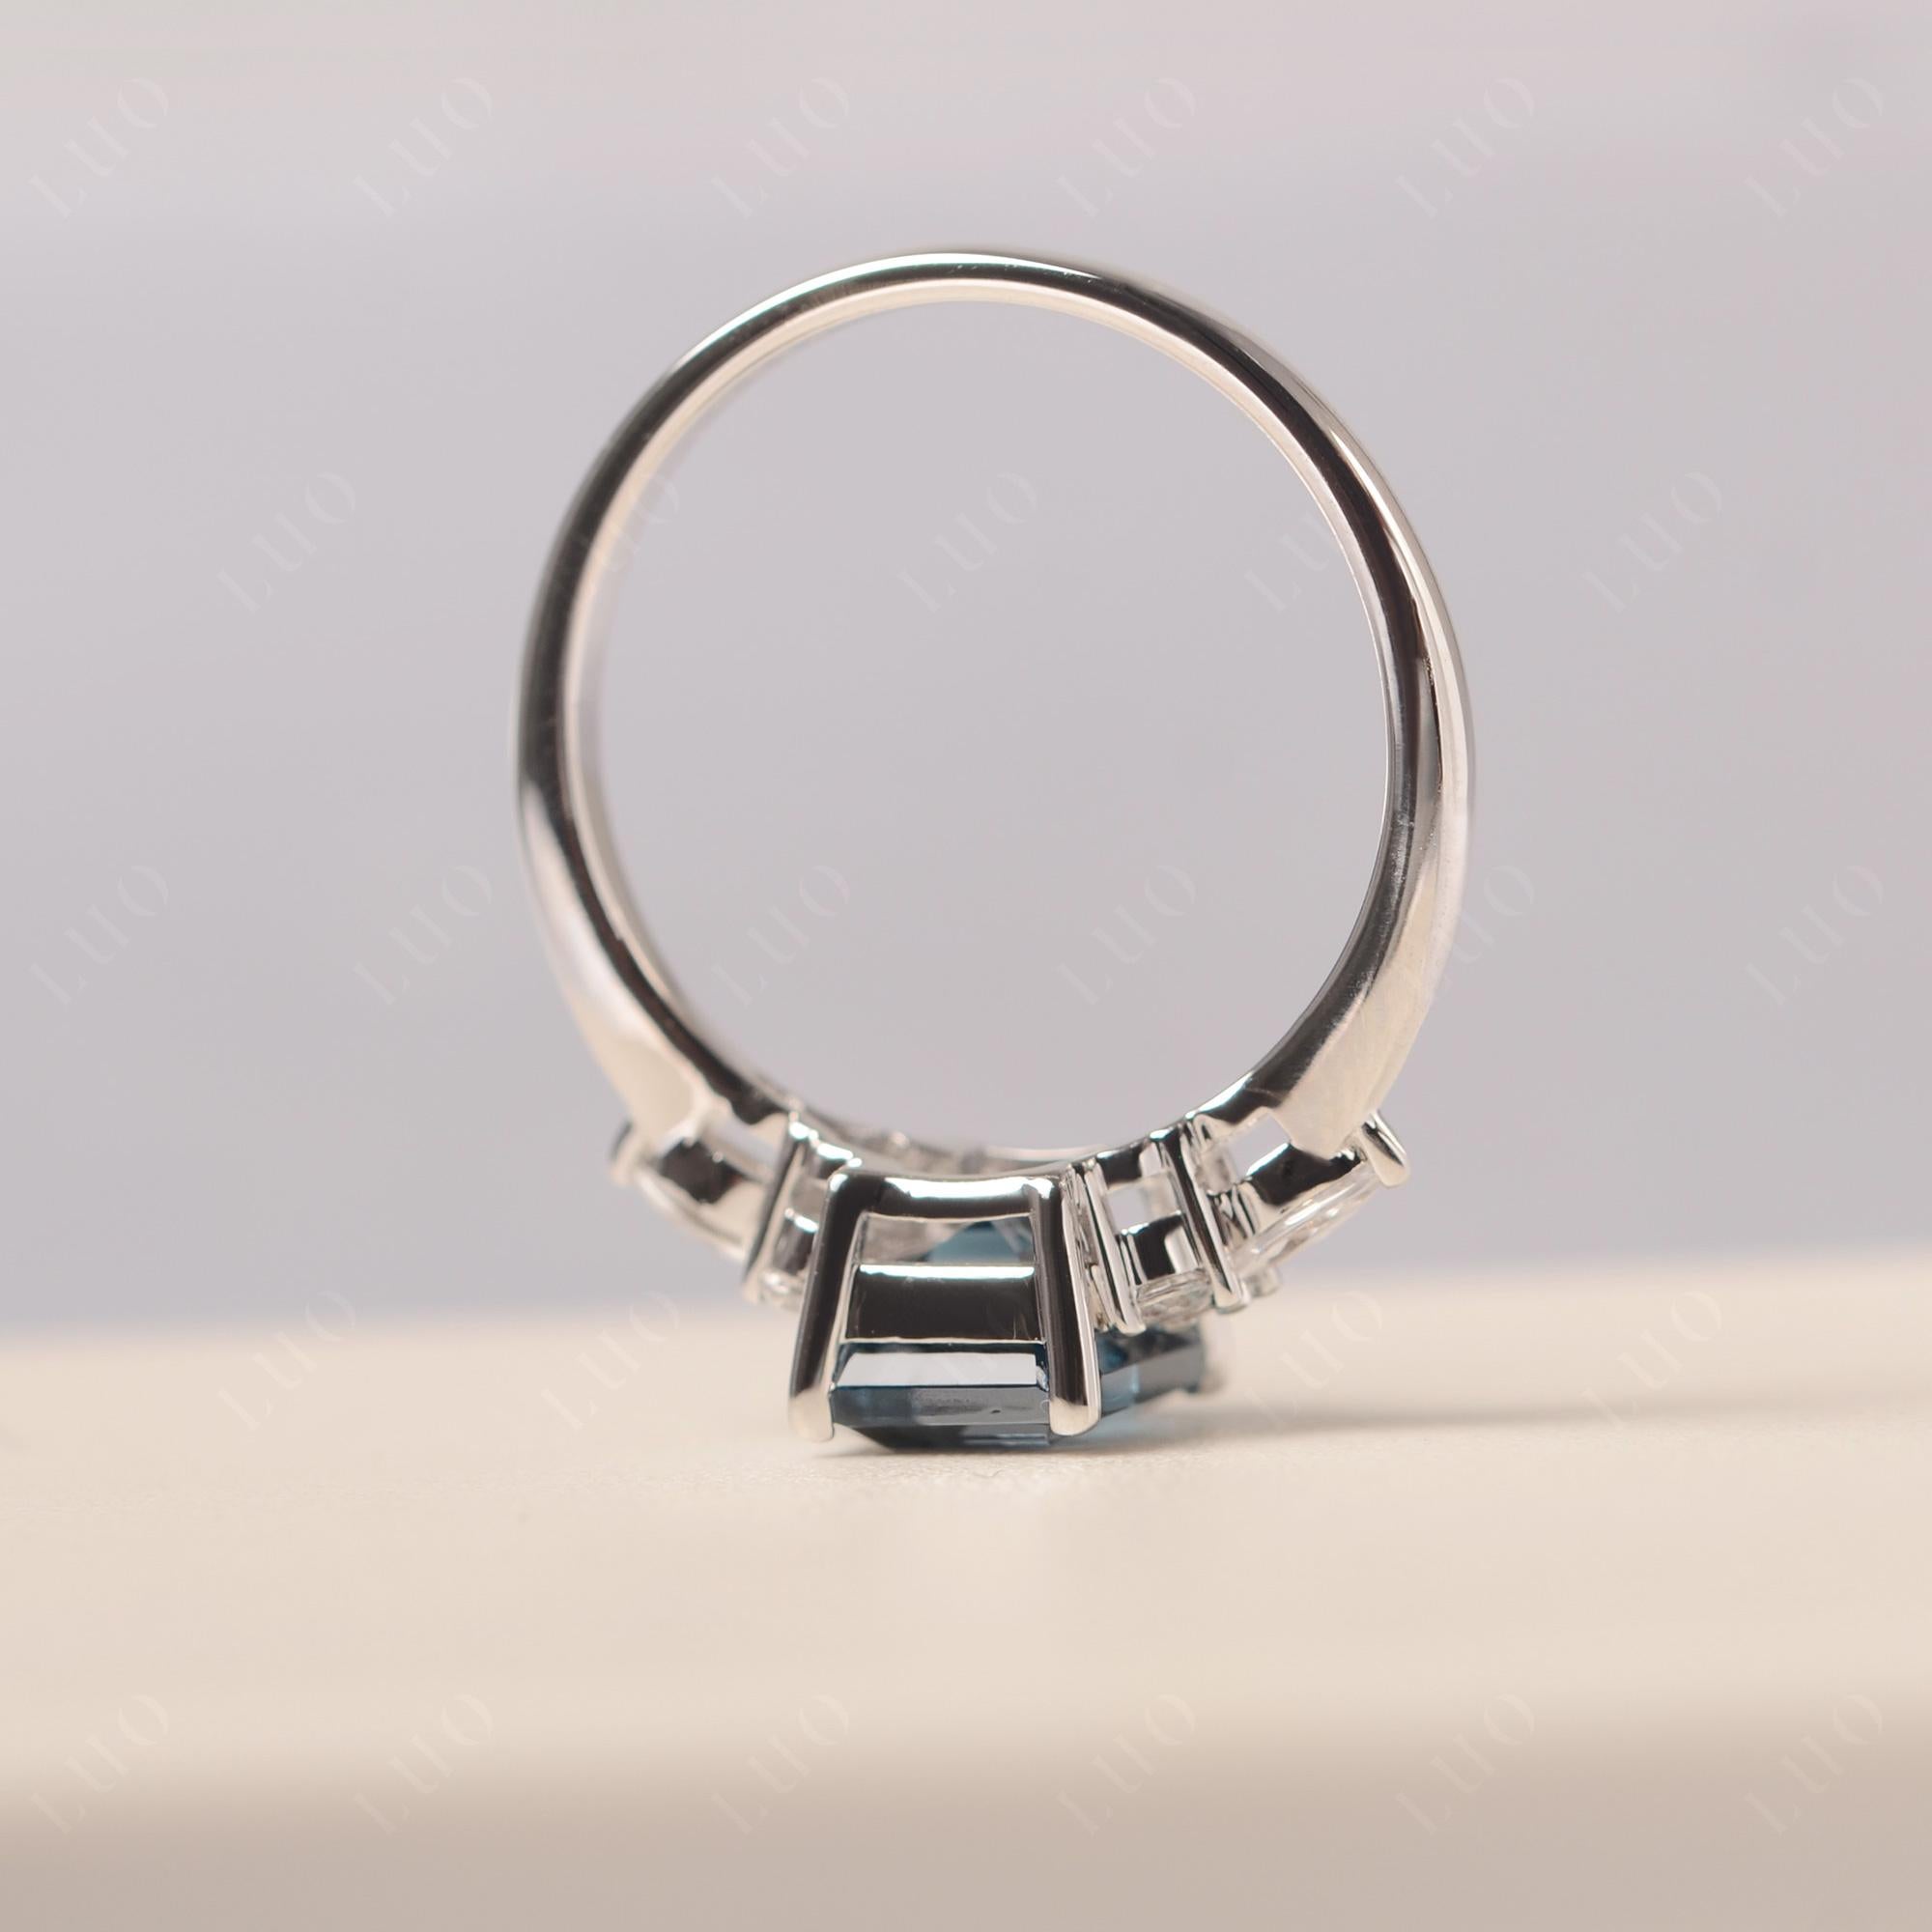 Simple Emerald Cut London Blue Topaz Ring - LUO Jewelry